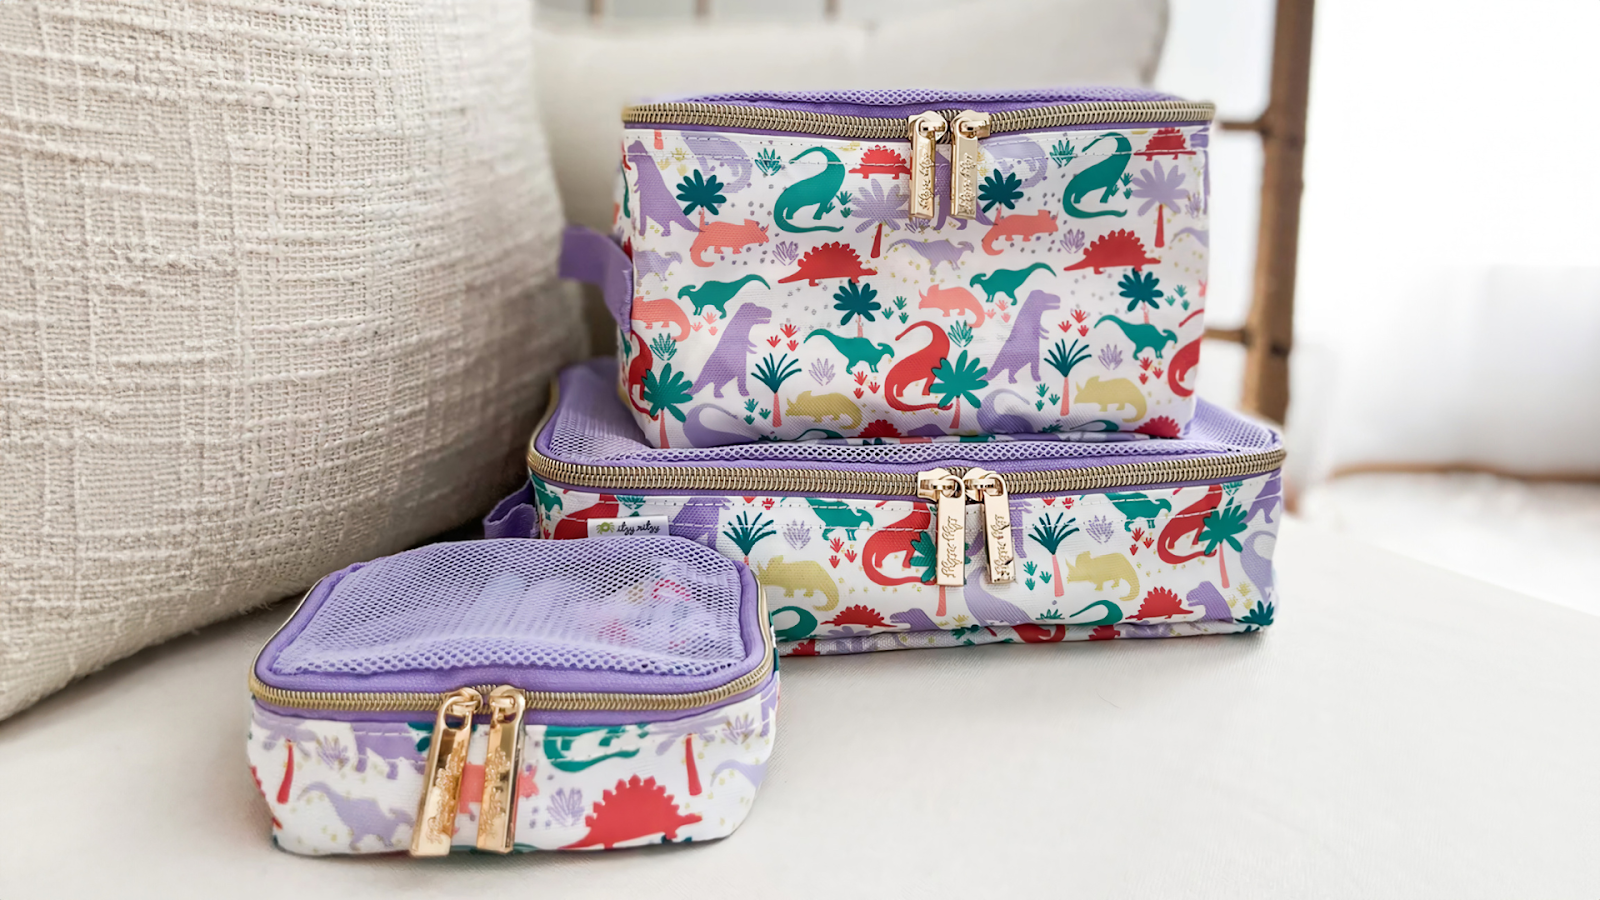 Itzy Ritzy Packing Cubes in Lilac Dinos pattern